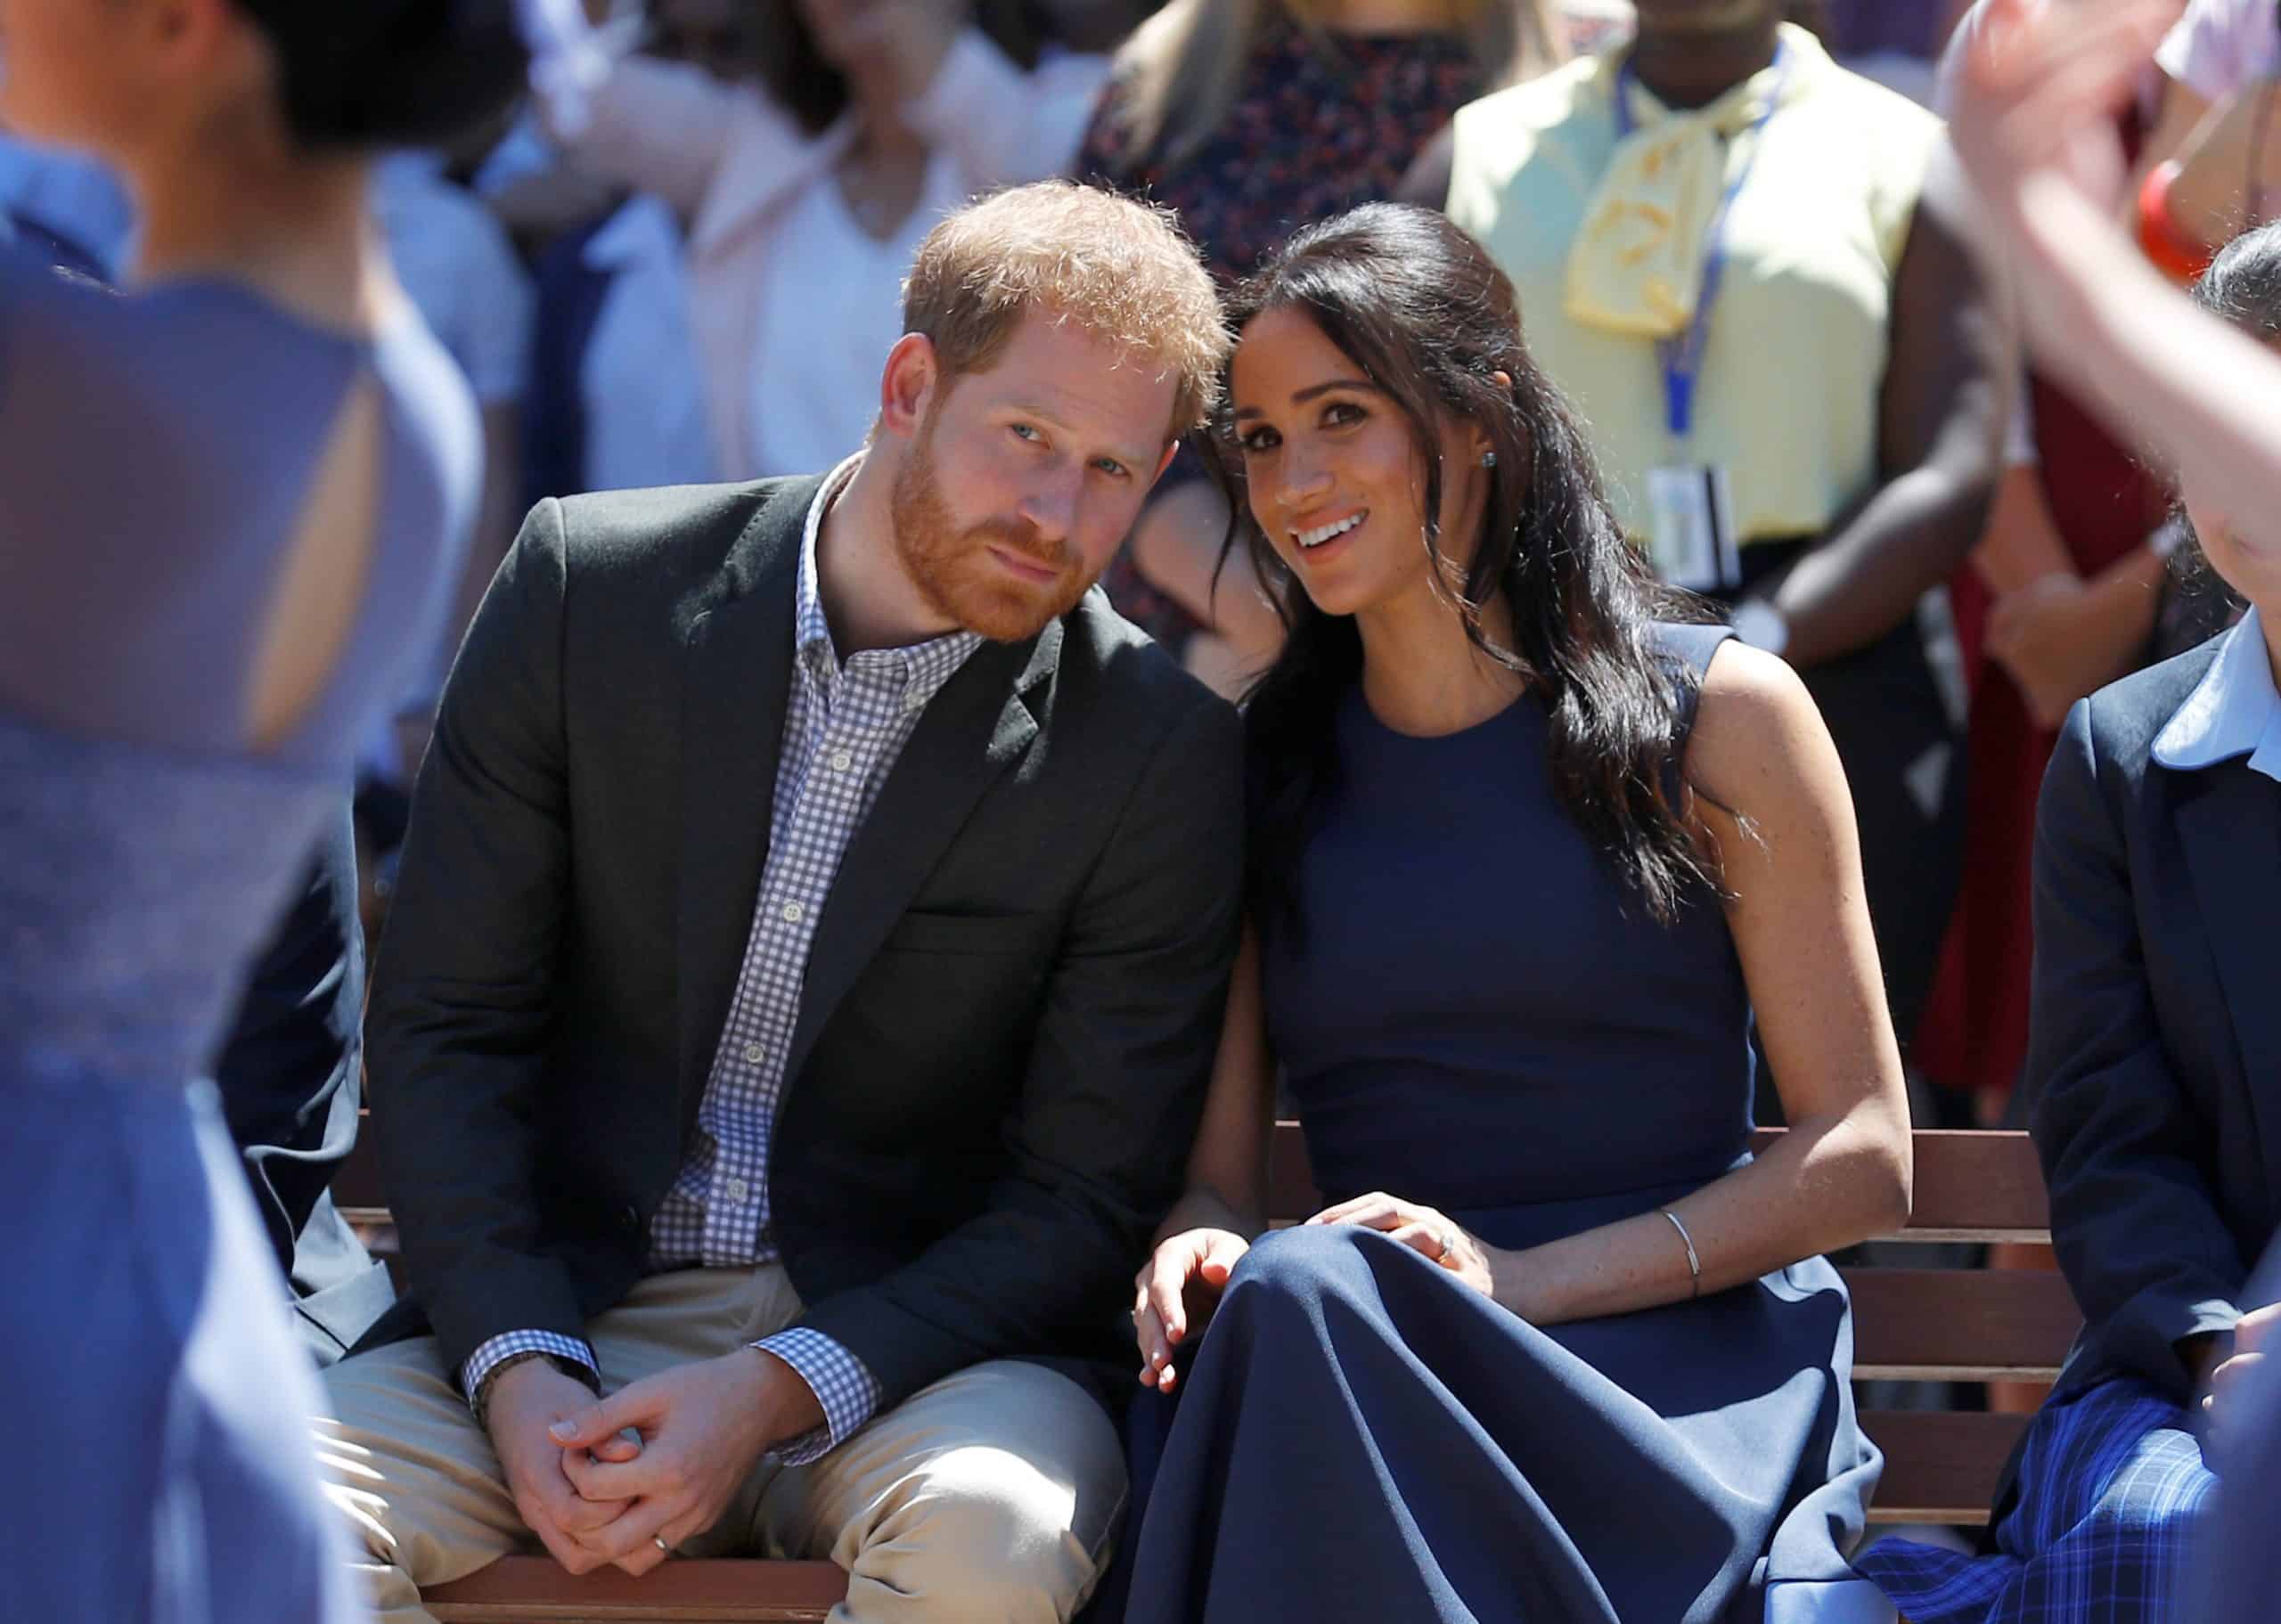 Prince Harry and Meghan Markle won’t return to the Royal Family